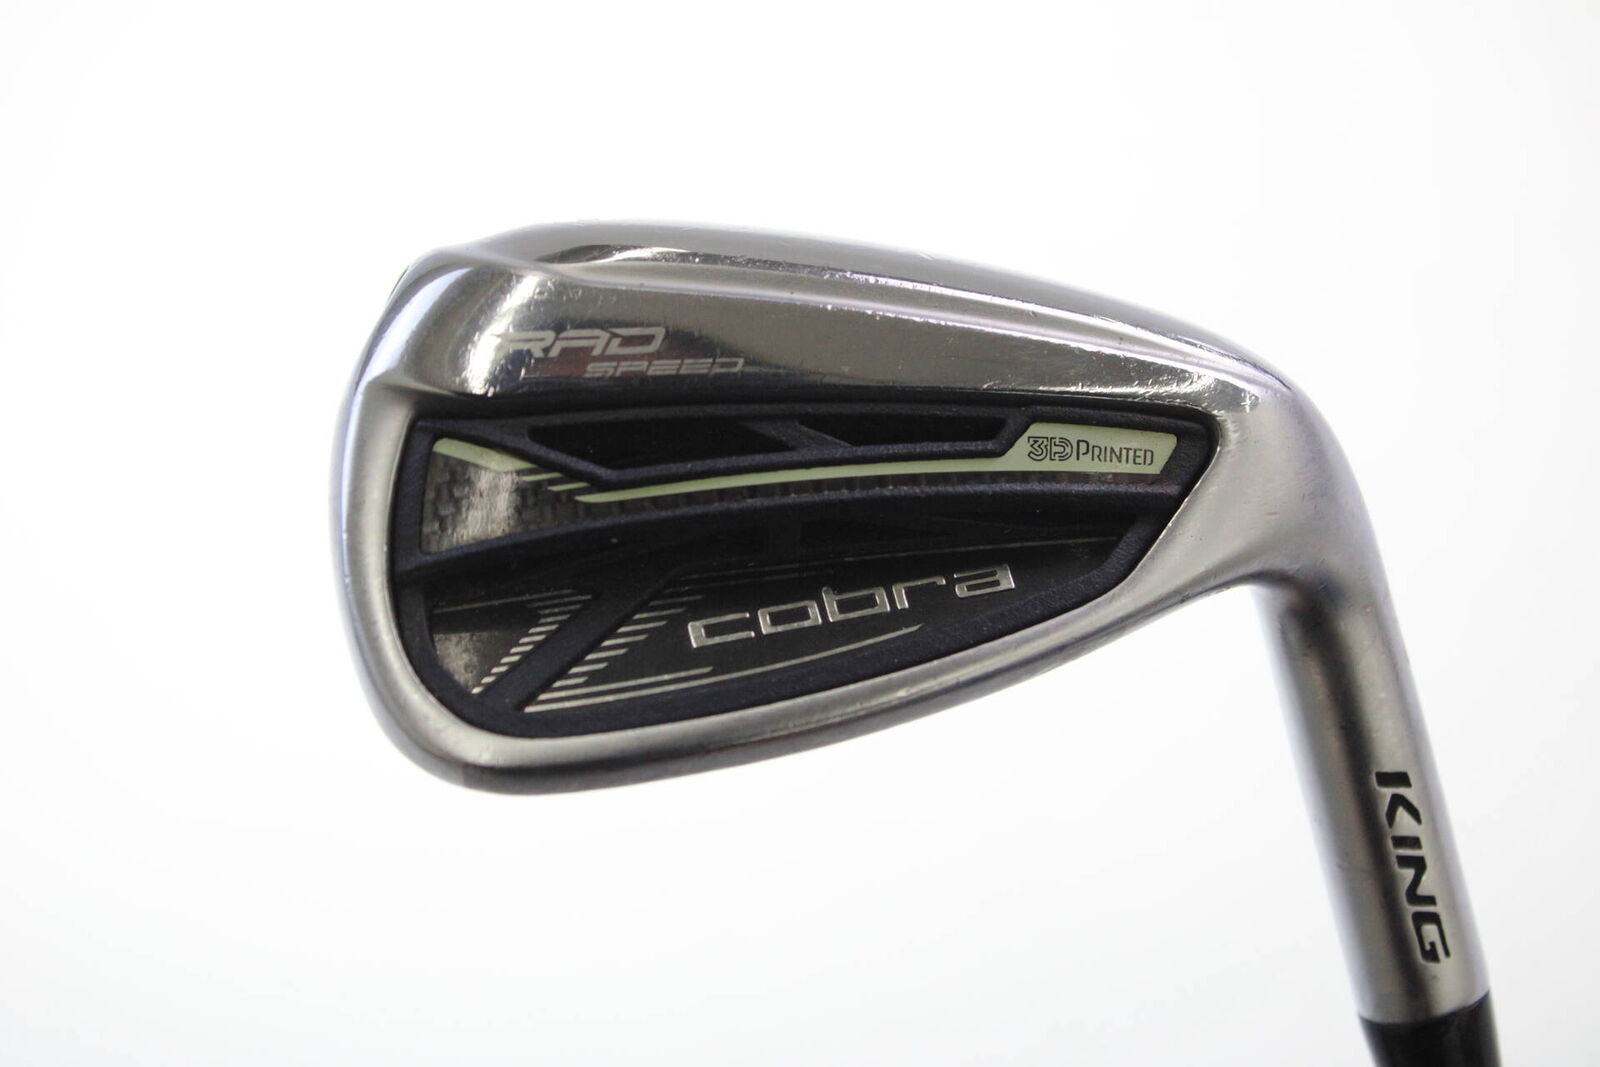 Cobra King Radspeed Iron Set 5-PW and GW Regular Right-Handed Graphite #7755